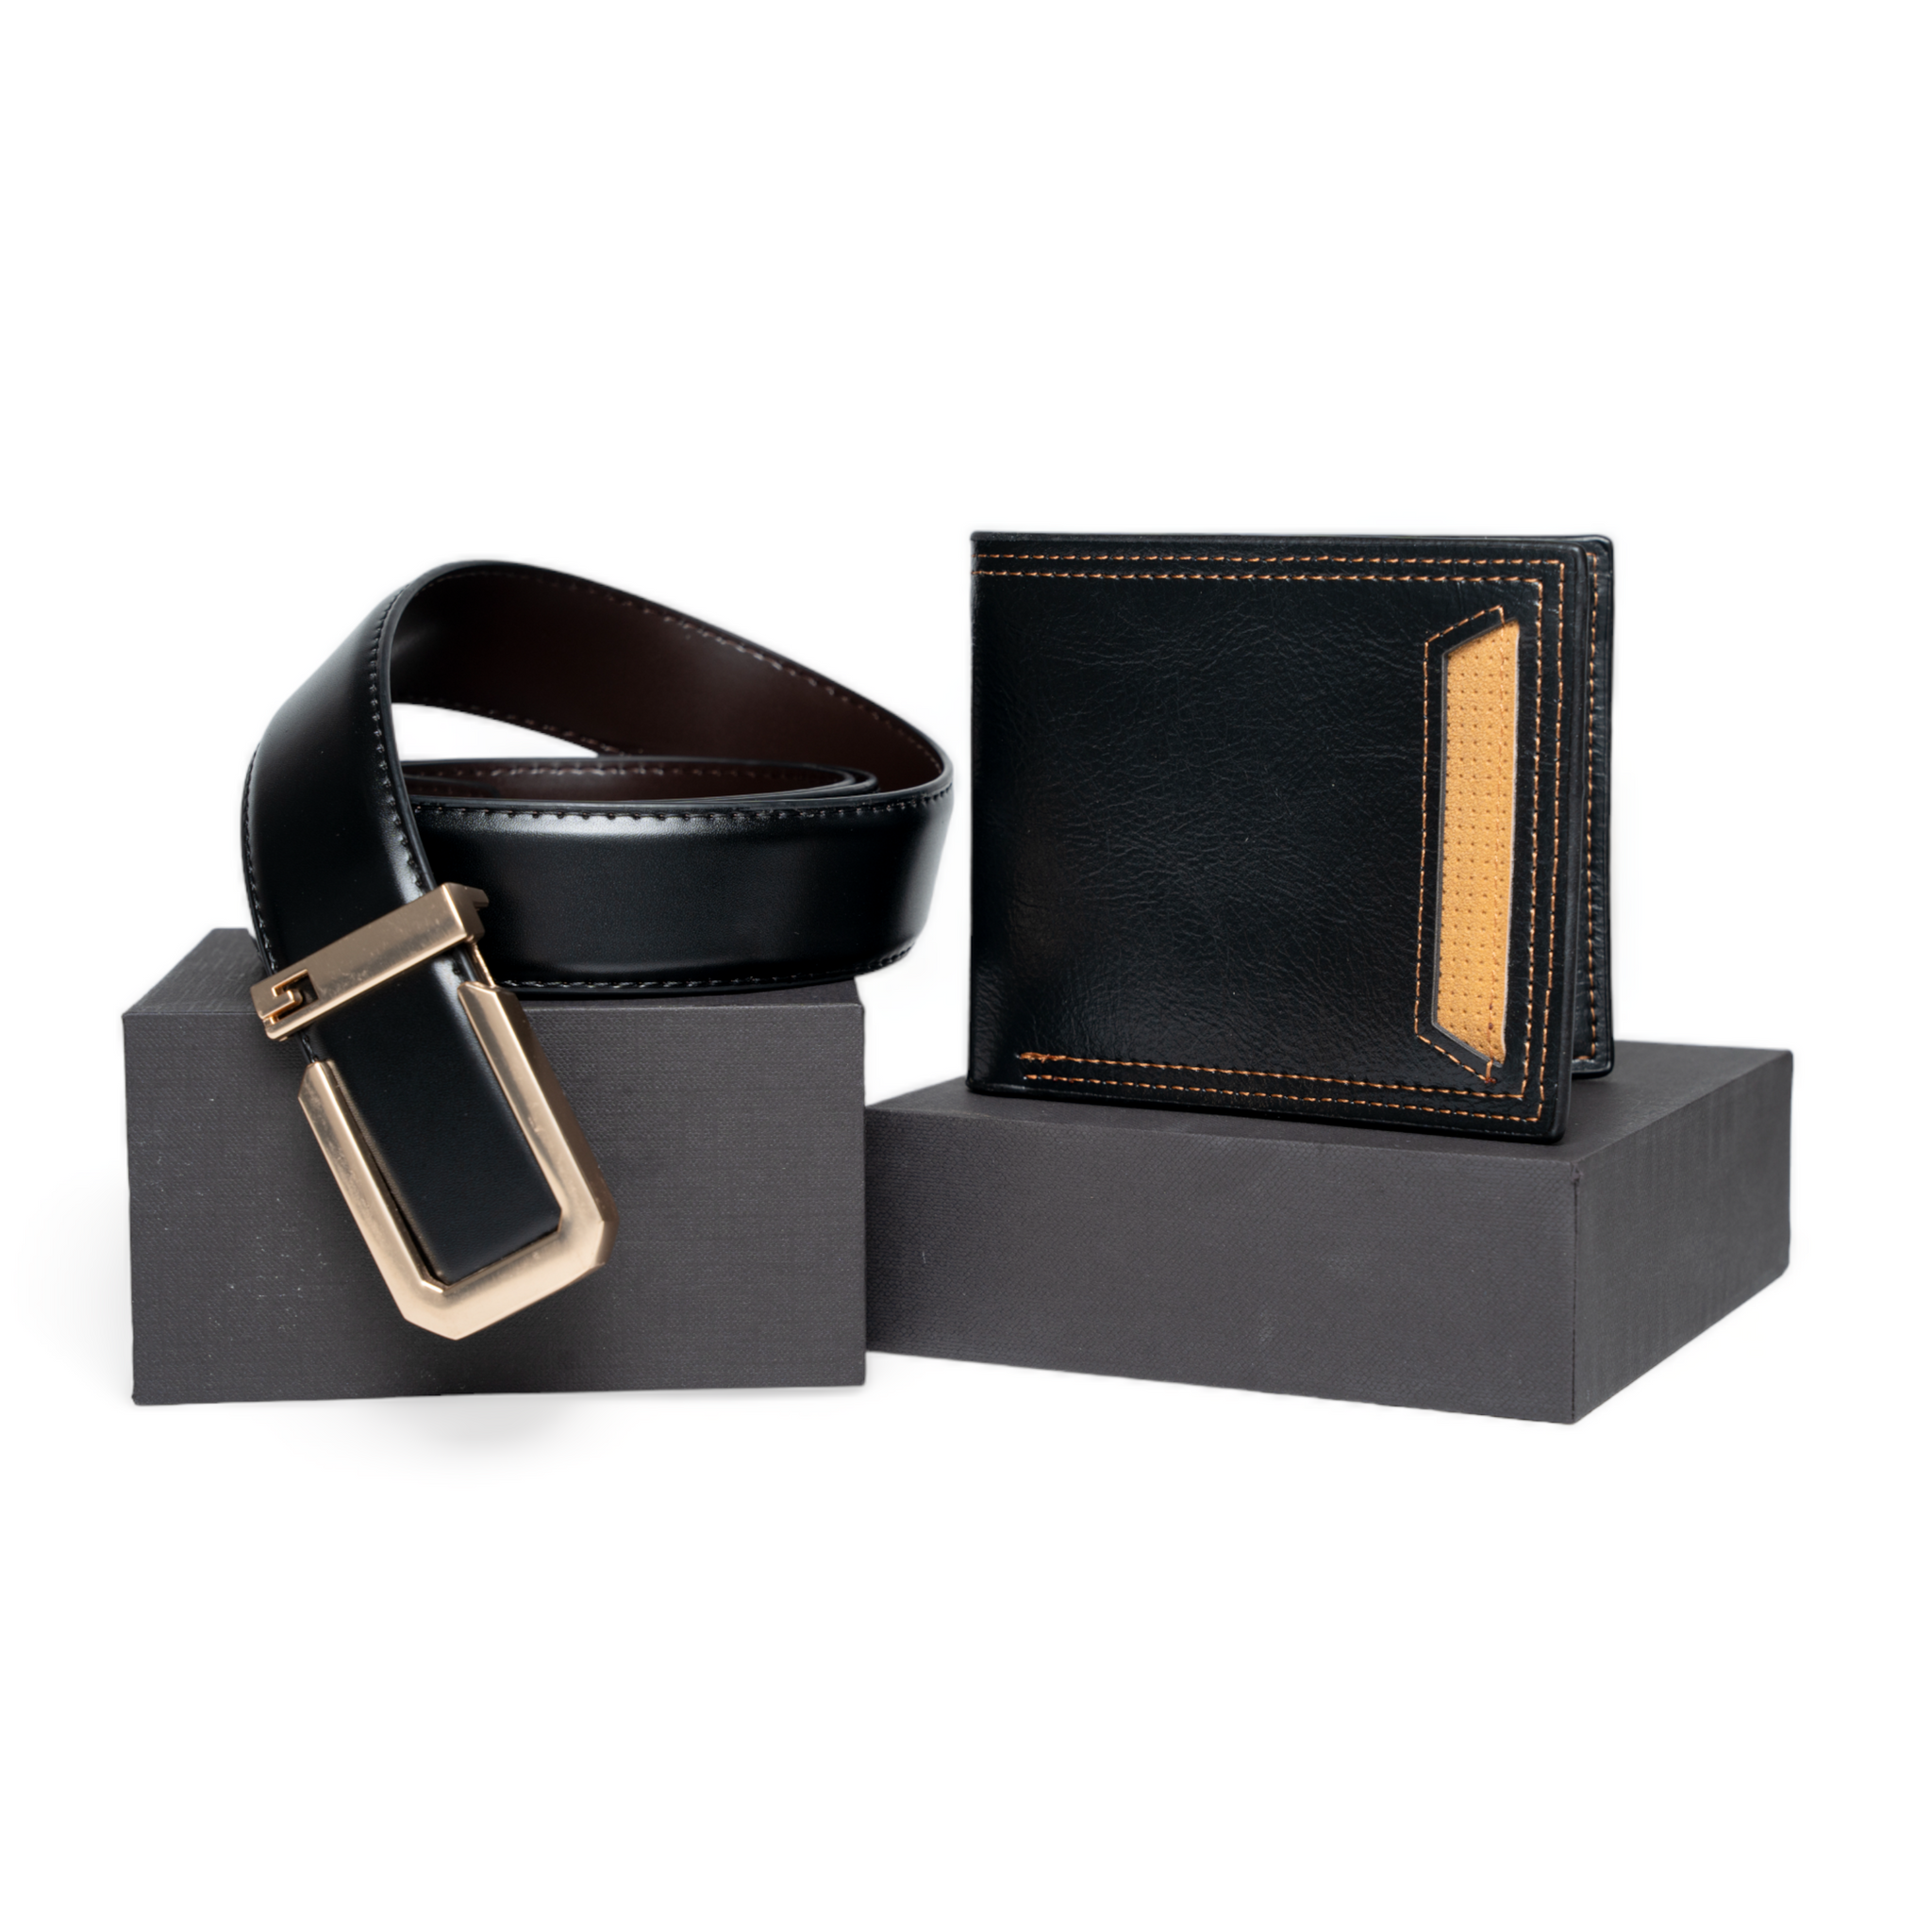 Chokore Special 2-in-1 Gift Set for Him (Black Belt and Wallet)